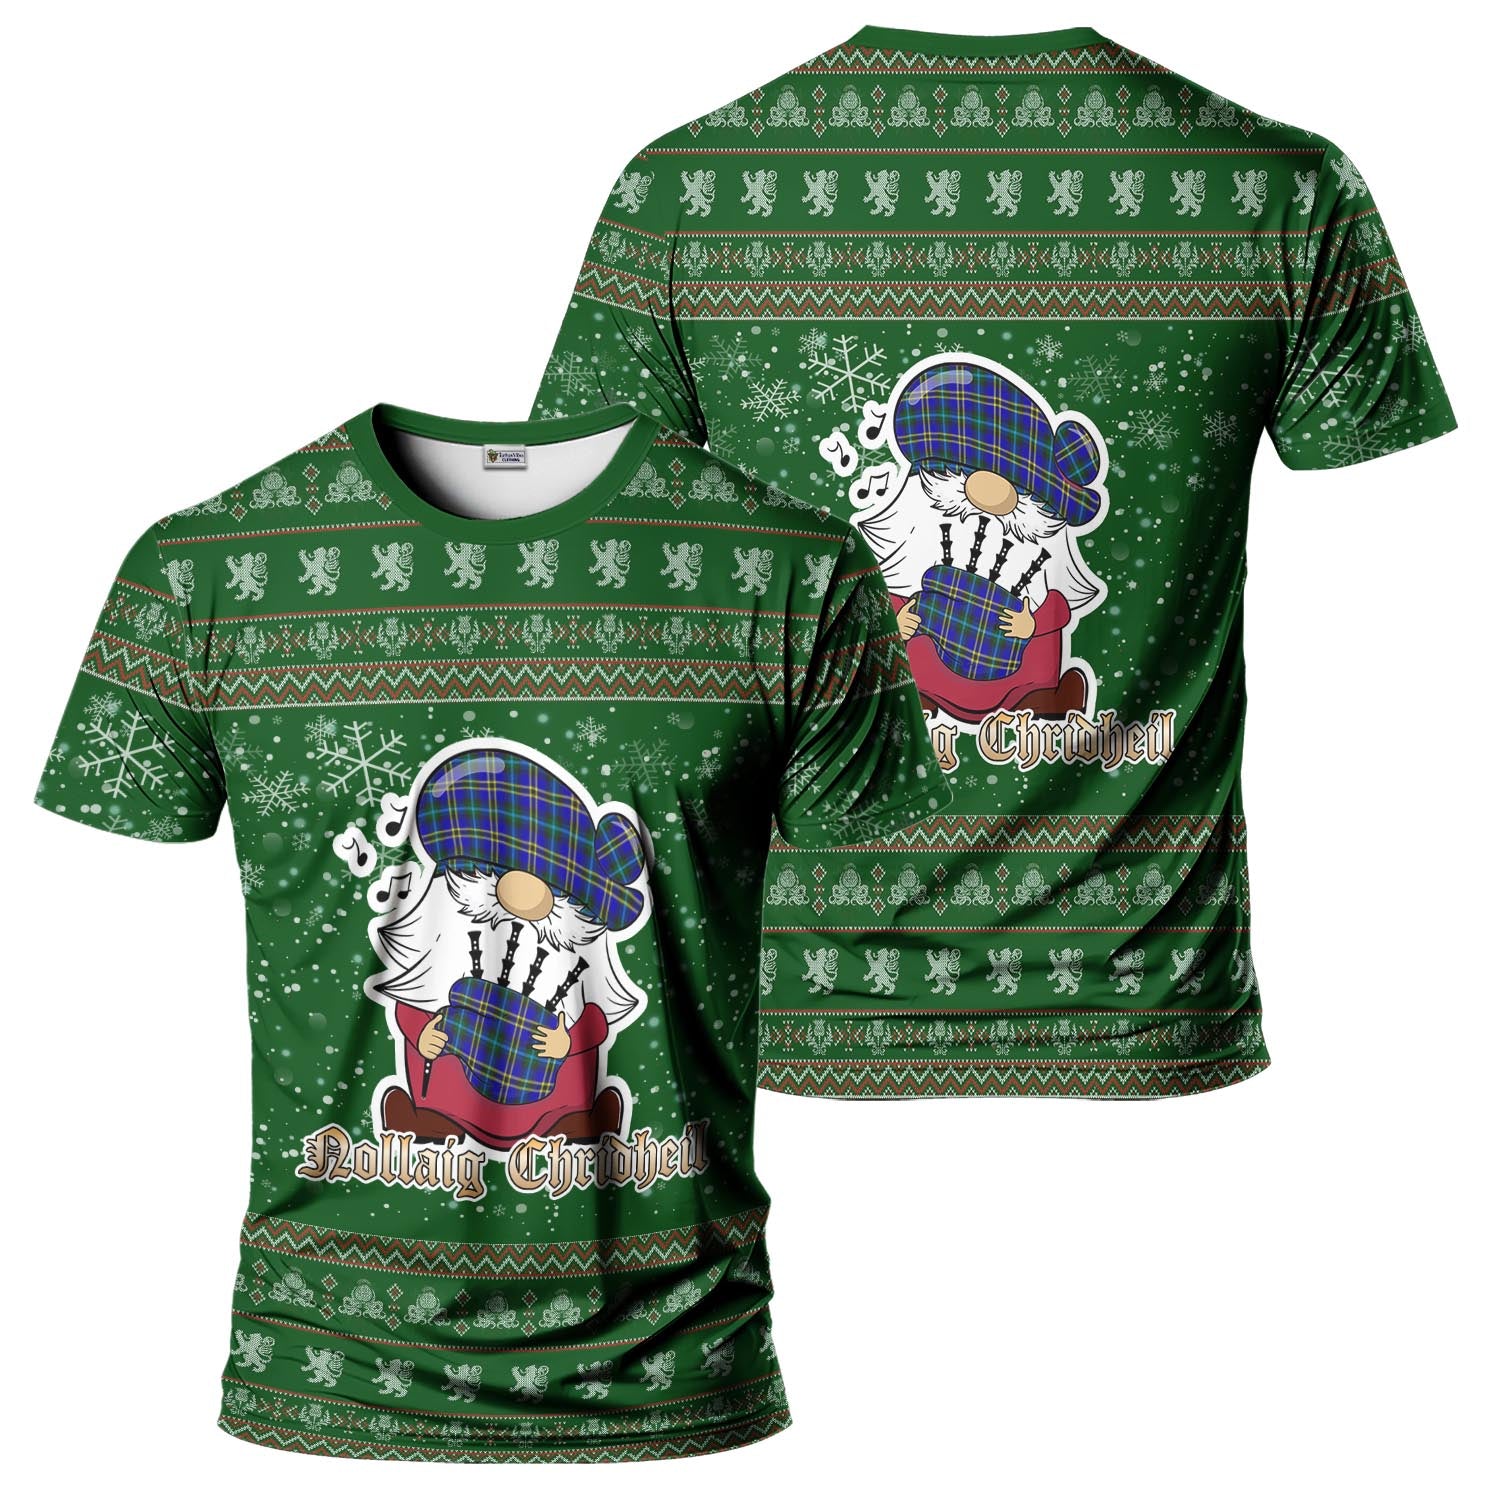 Weir Modern Clan Christmas Family T-Shirt with Funny Gnome Playing Bagpipes Men's Shirt Green - Tartanvibesclothing